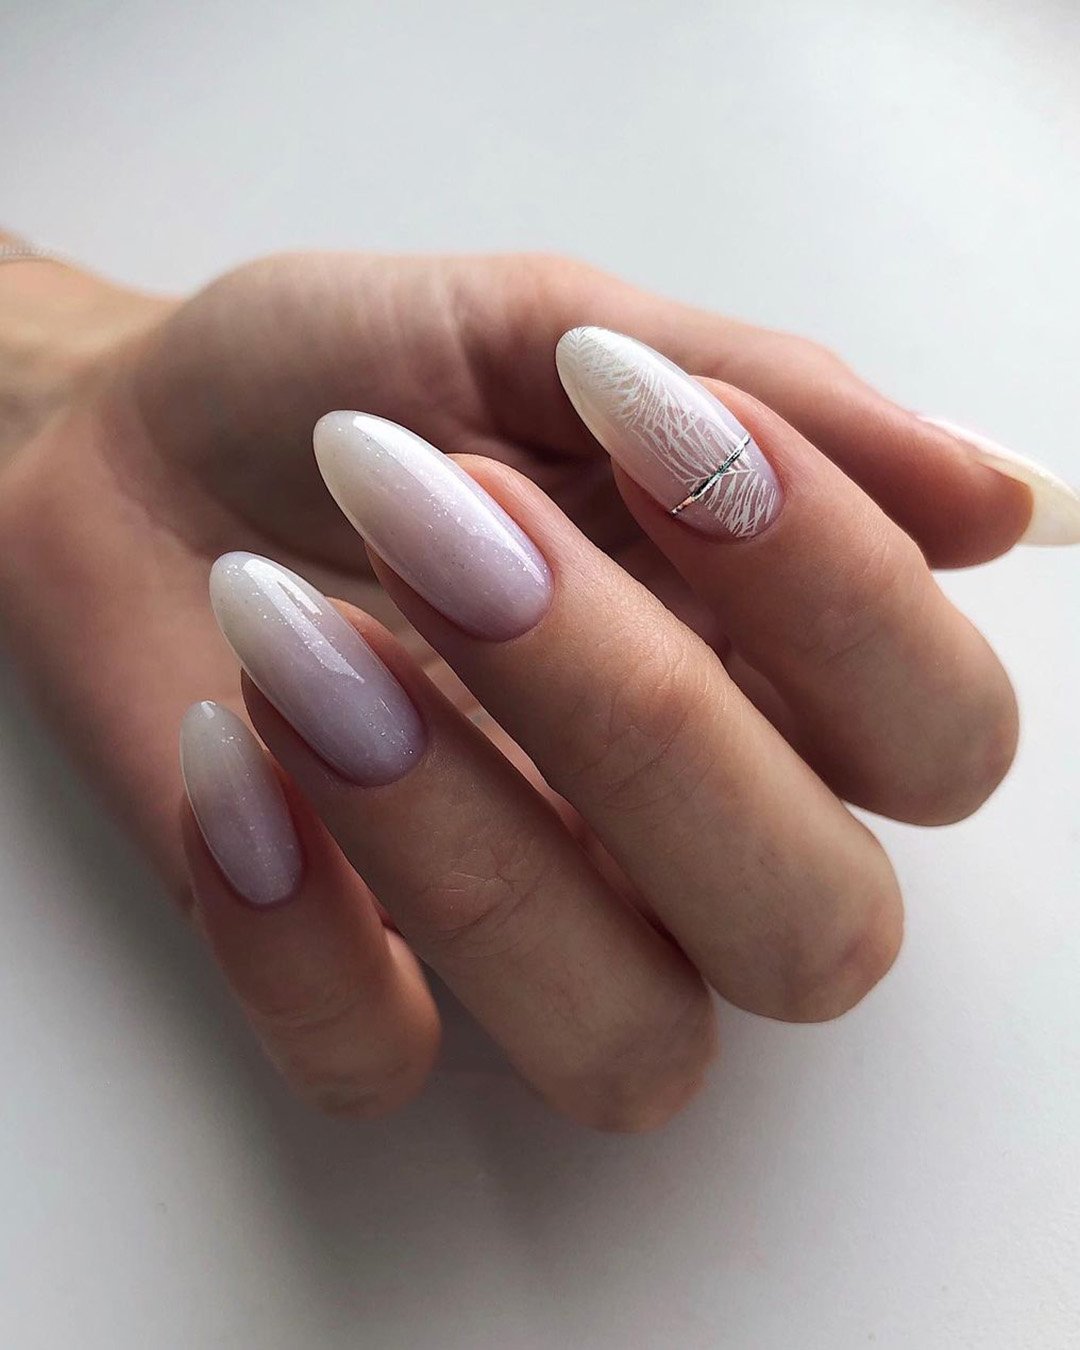 nail ideas wedding pink white ombre with silver stripe gert_nails